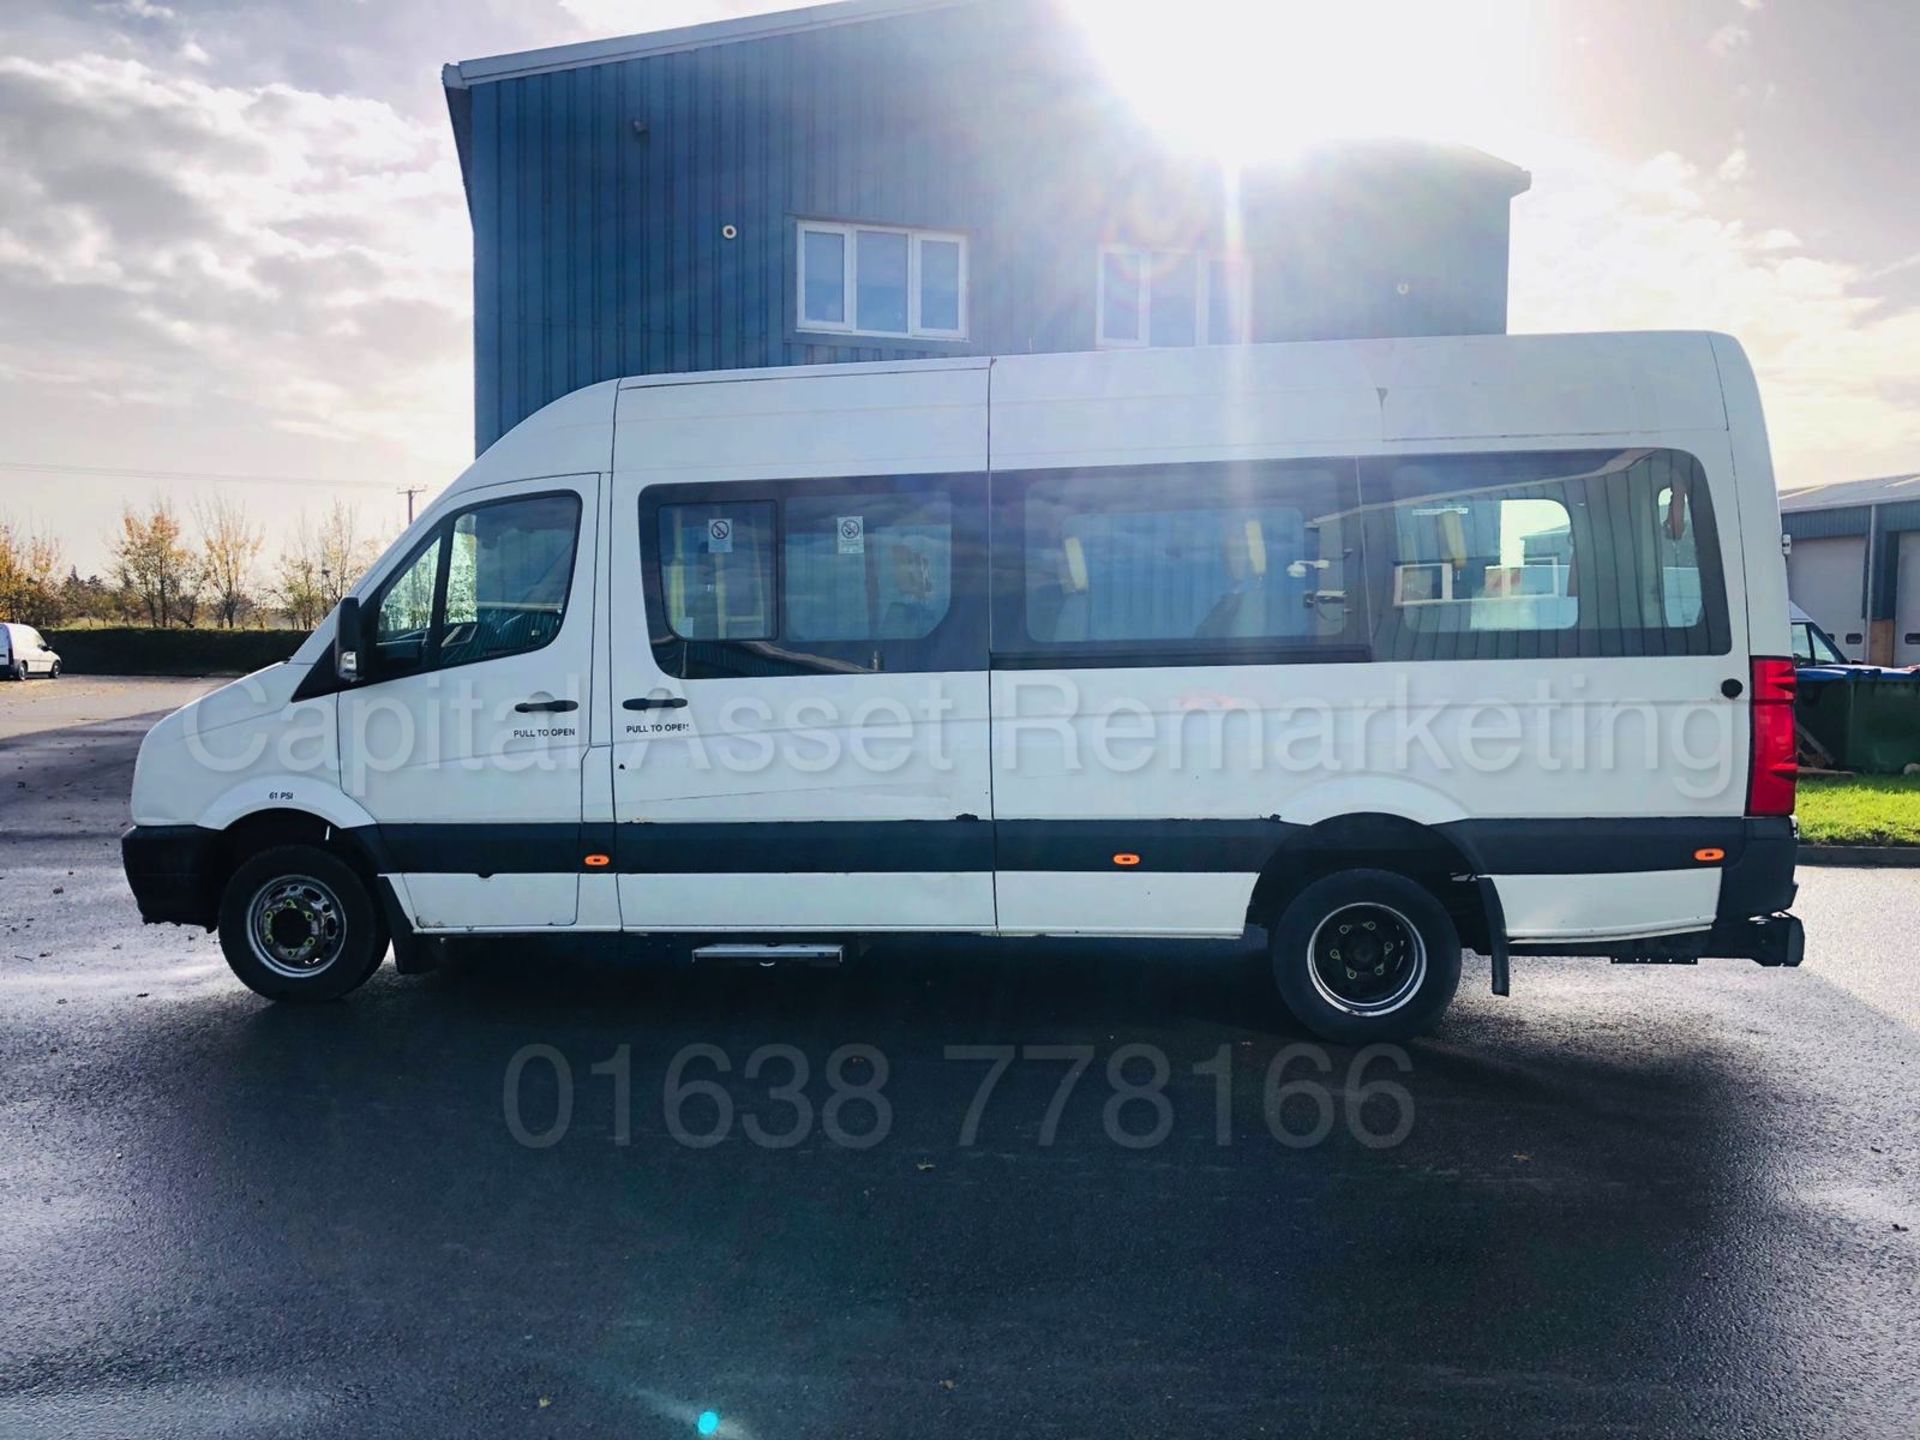 VOLKSWAGEN CRAFTER 2.5 TDI *LWB - 16 SEATER MINI-BUS / COACH* (2007) *ELECTRIC WHEEL CHAIR LIFT* - Image 11 of 38